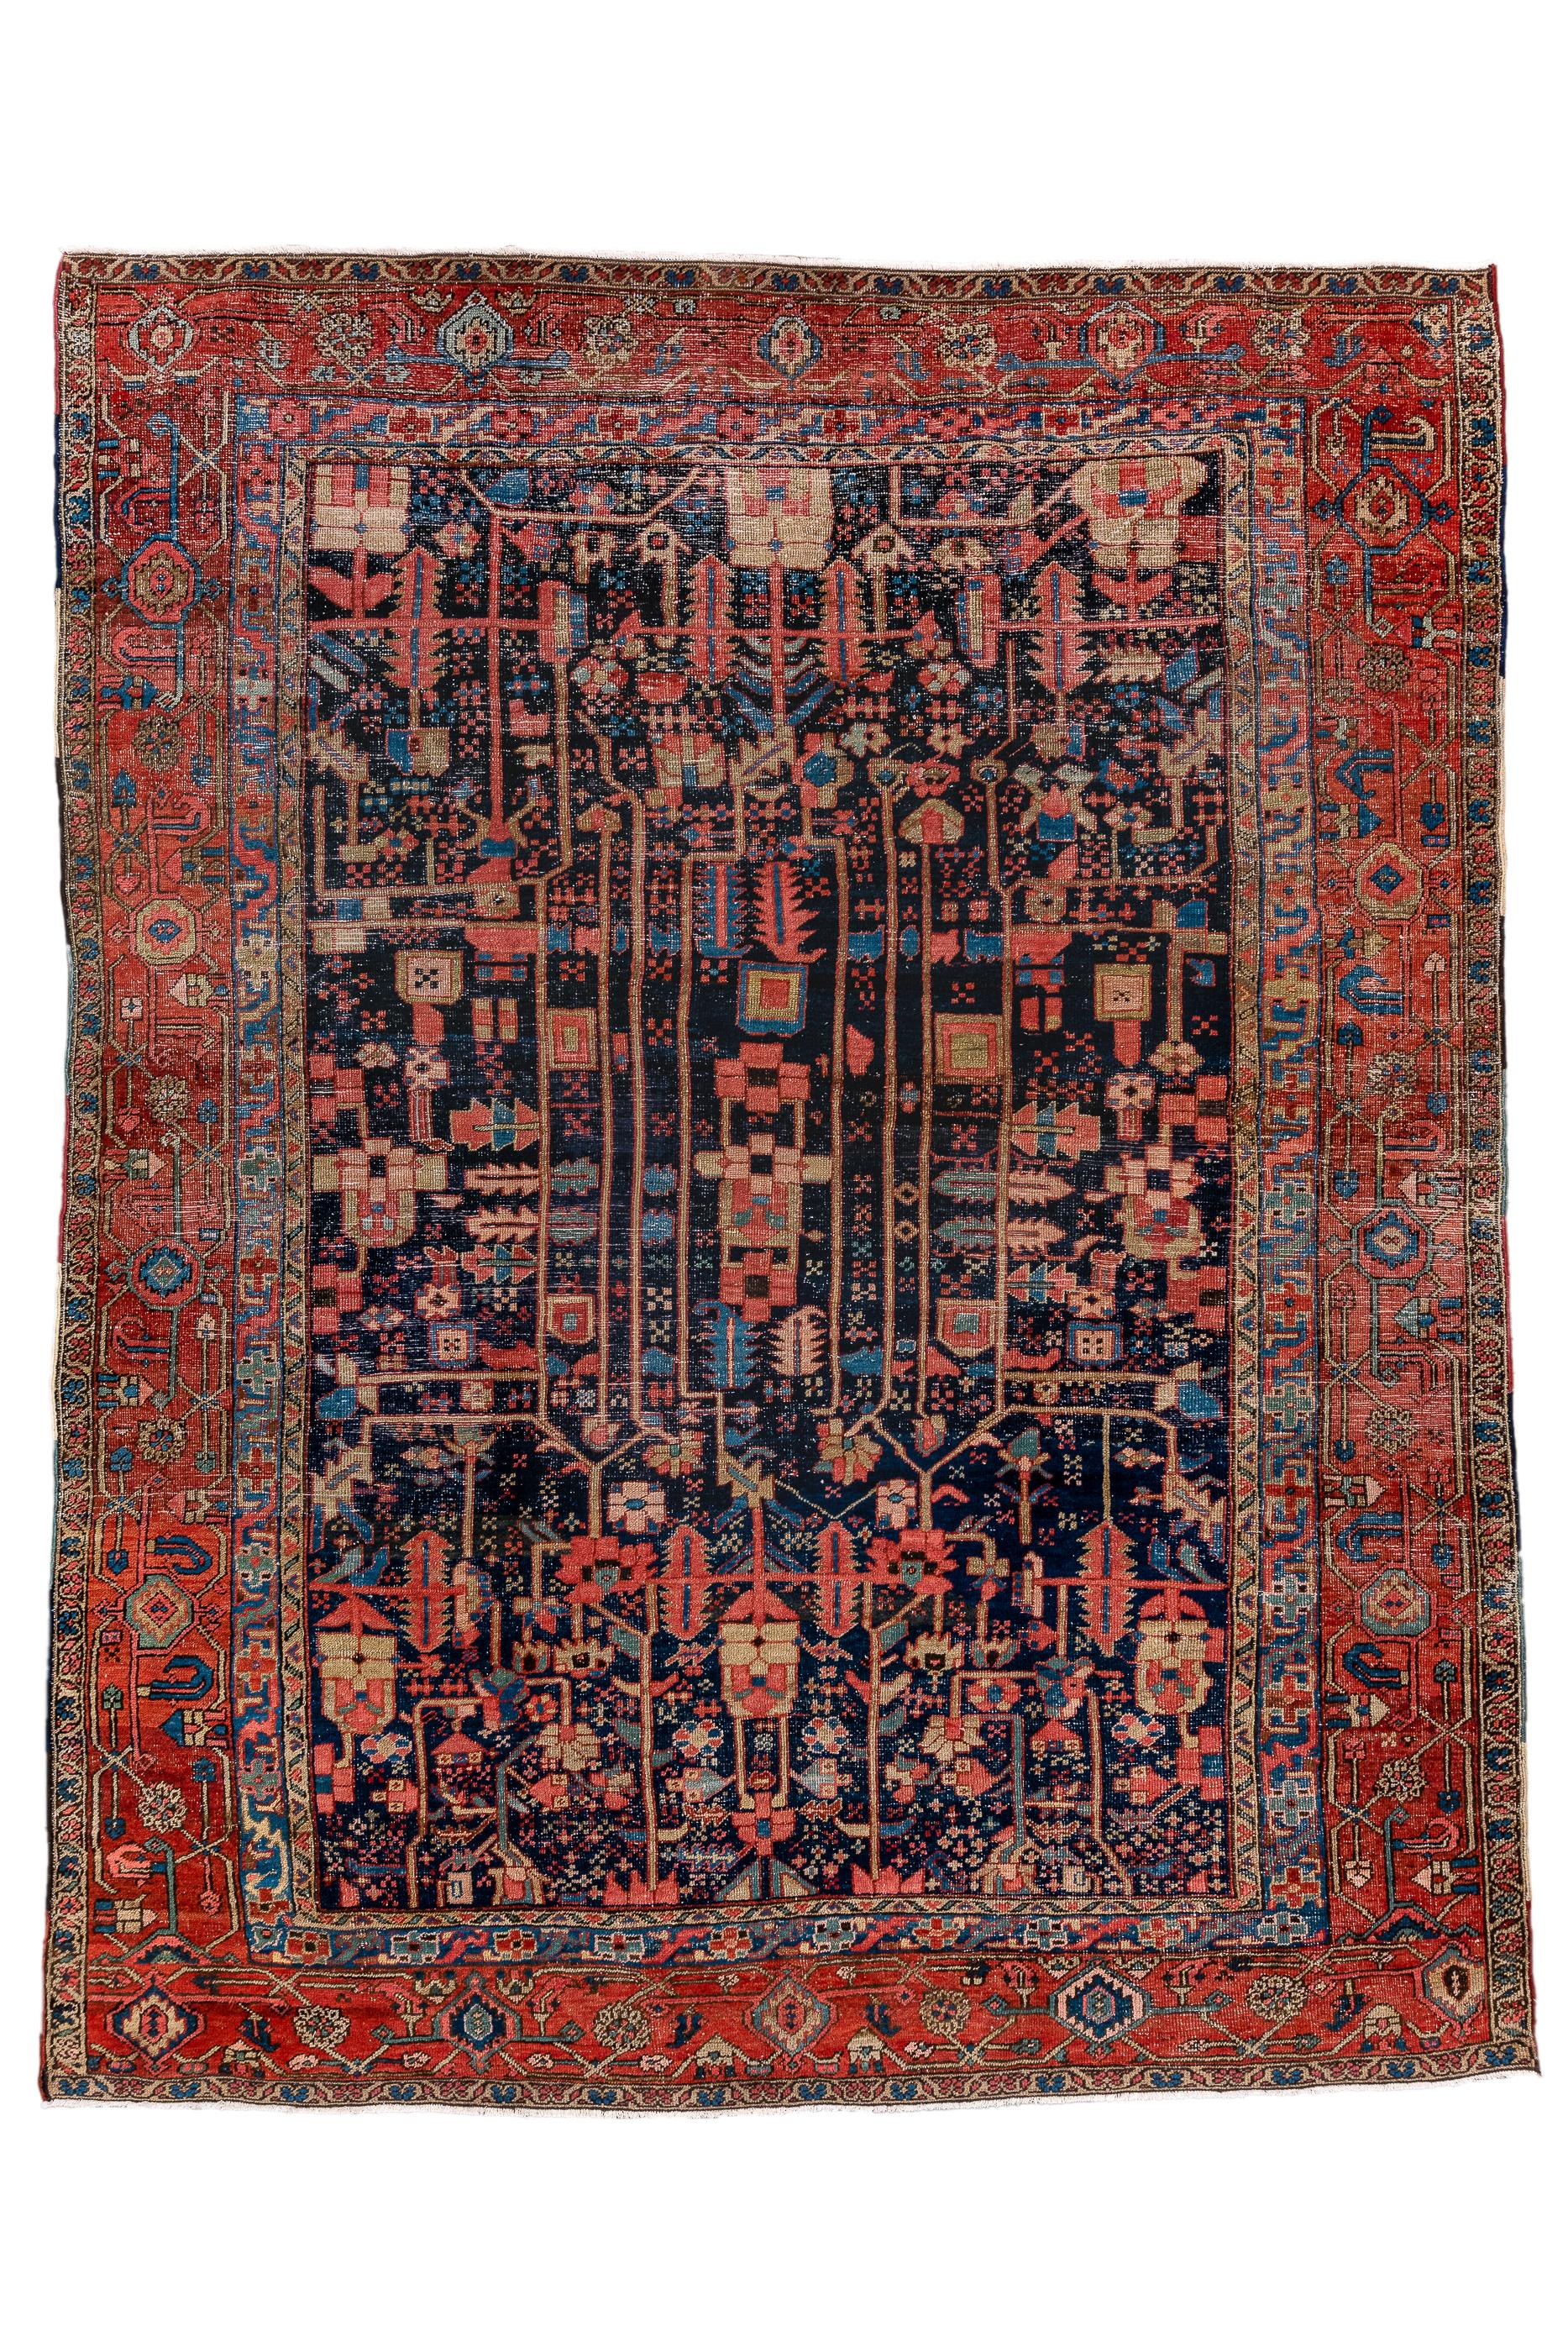 A very unusual piece with a dark blue indigo field displaying vertical bars forming reserves and decorated with rosettes, squared  flowerheads, barbed stiff leaves and other abstract devices.  The rust-red strip style main border  shows